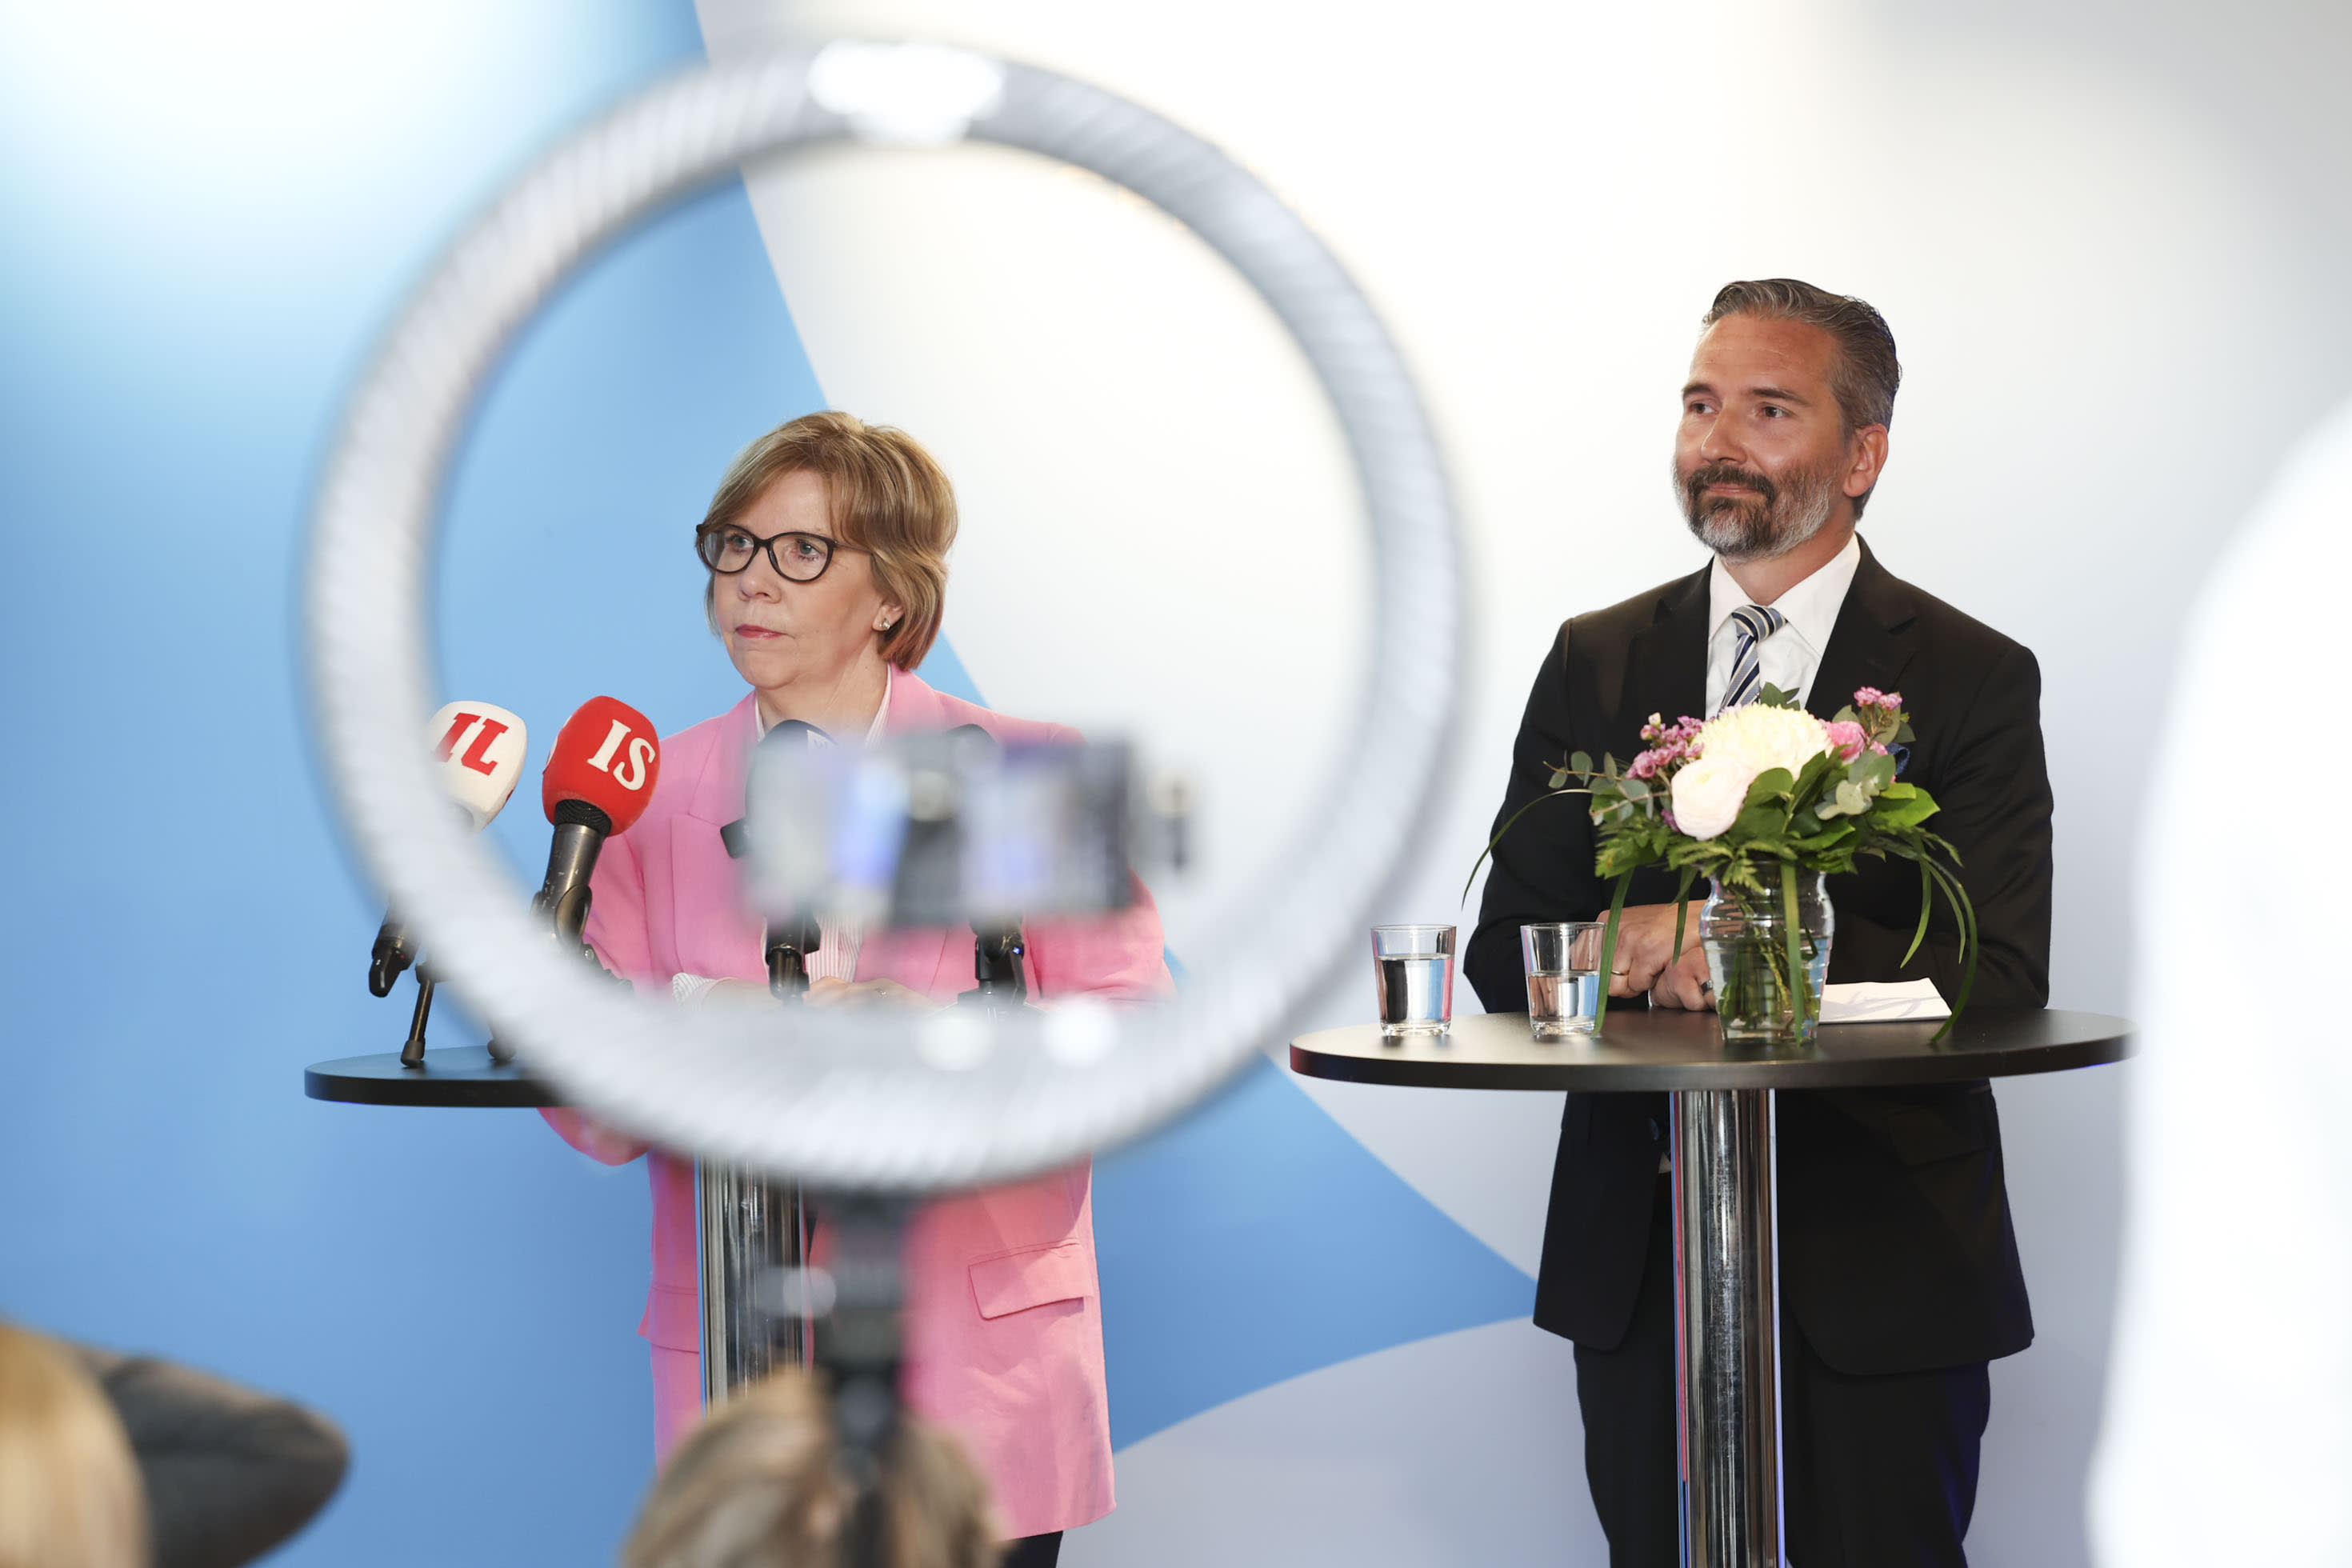 Henriksson, chairman of the Swedish People's Party, resigns as the party's support collapses